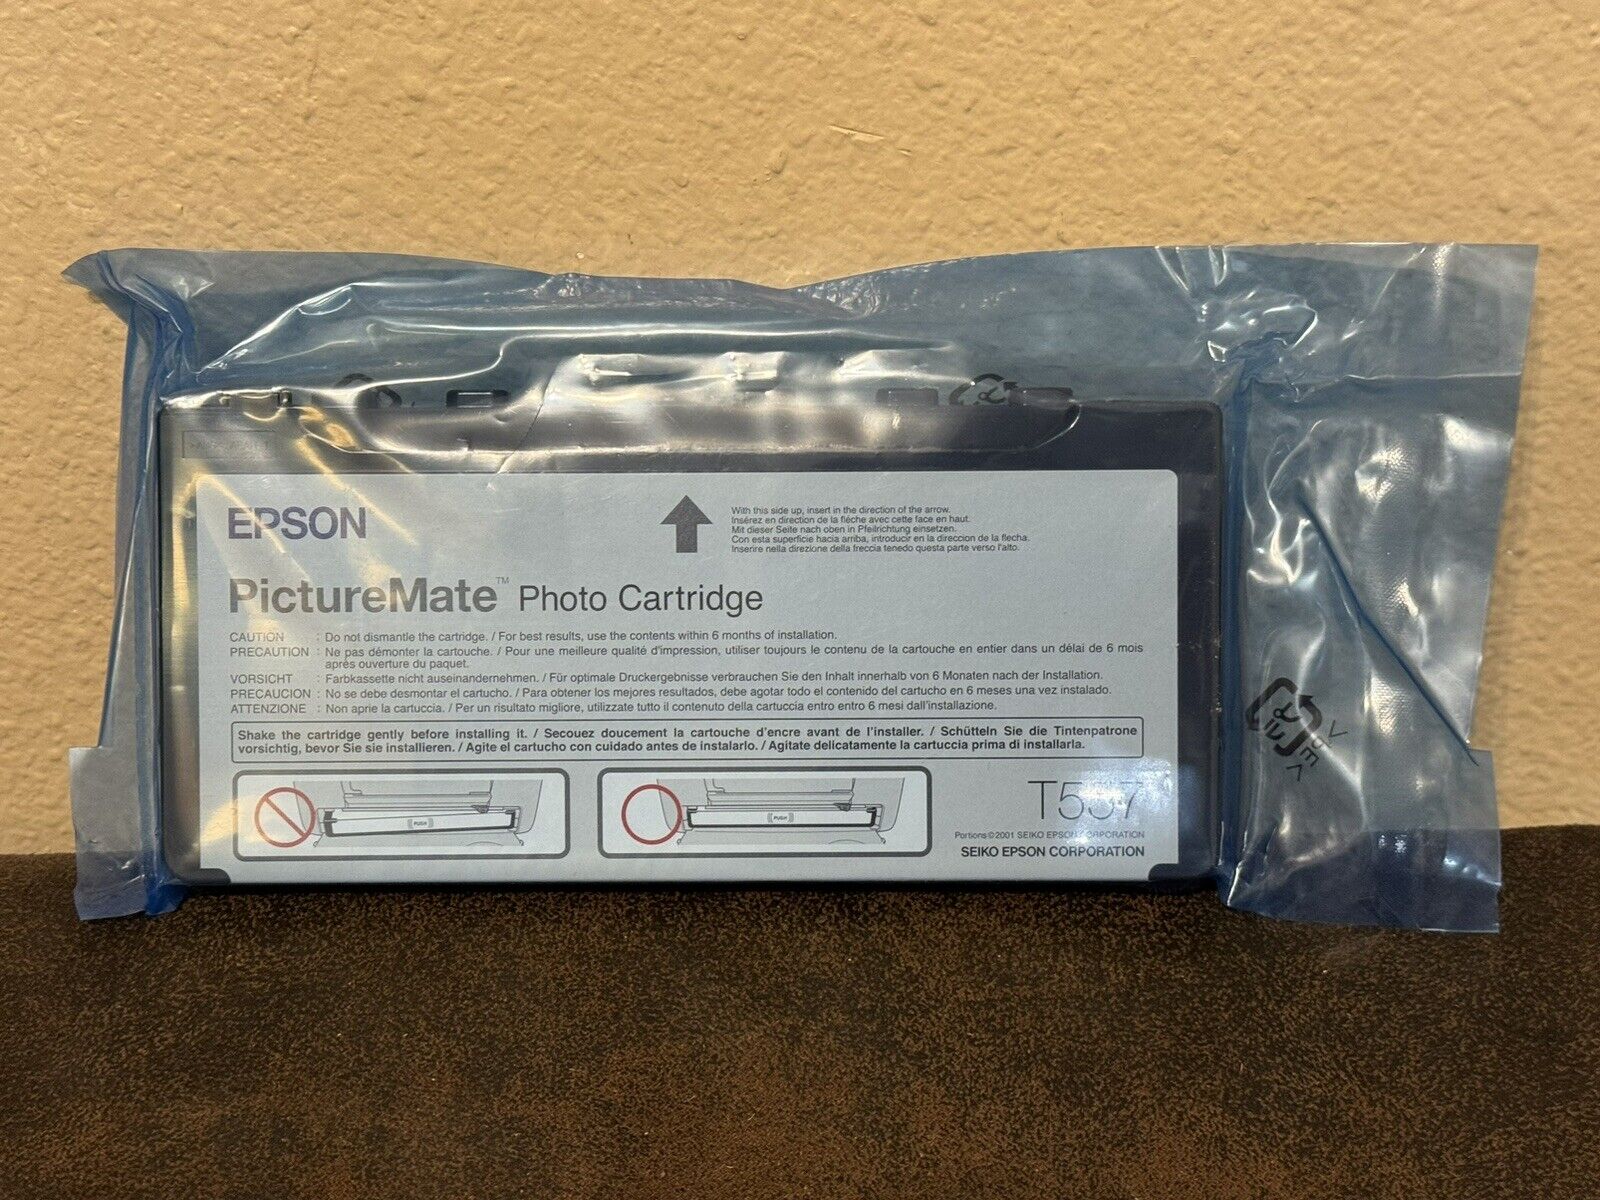 NEW Genuine Epson T557 PictureMate Photo Cartridge Sealed in Bag Exp 2007